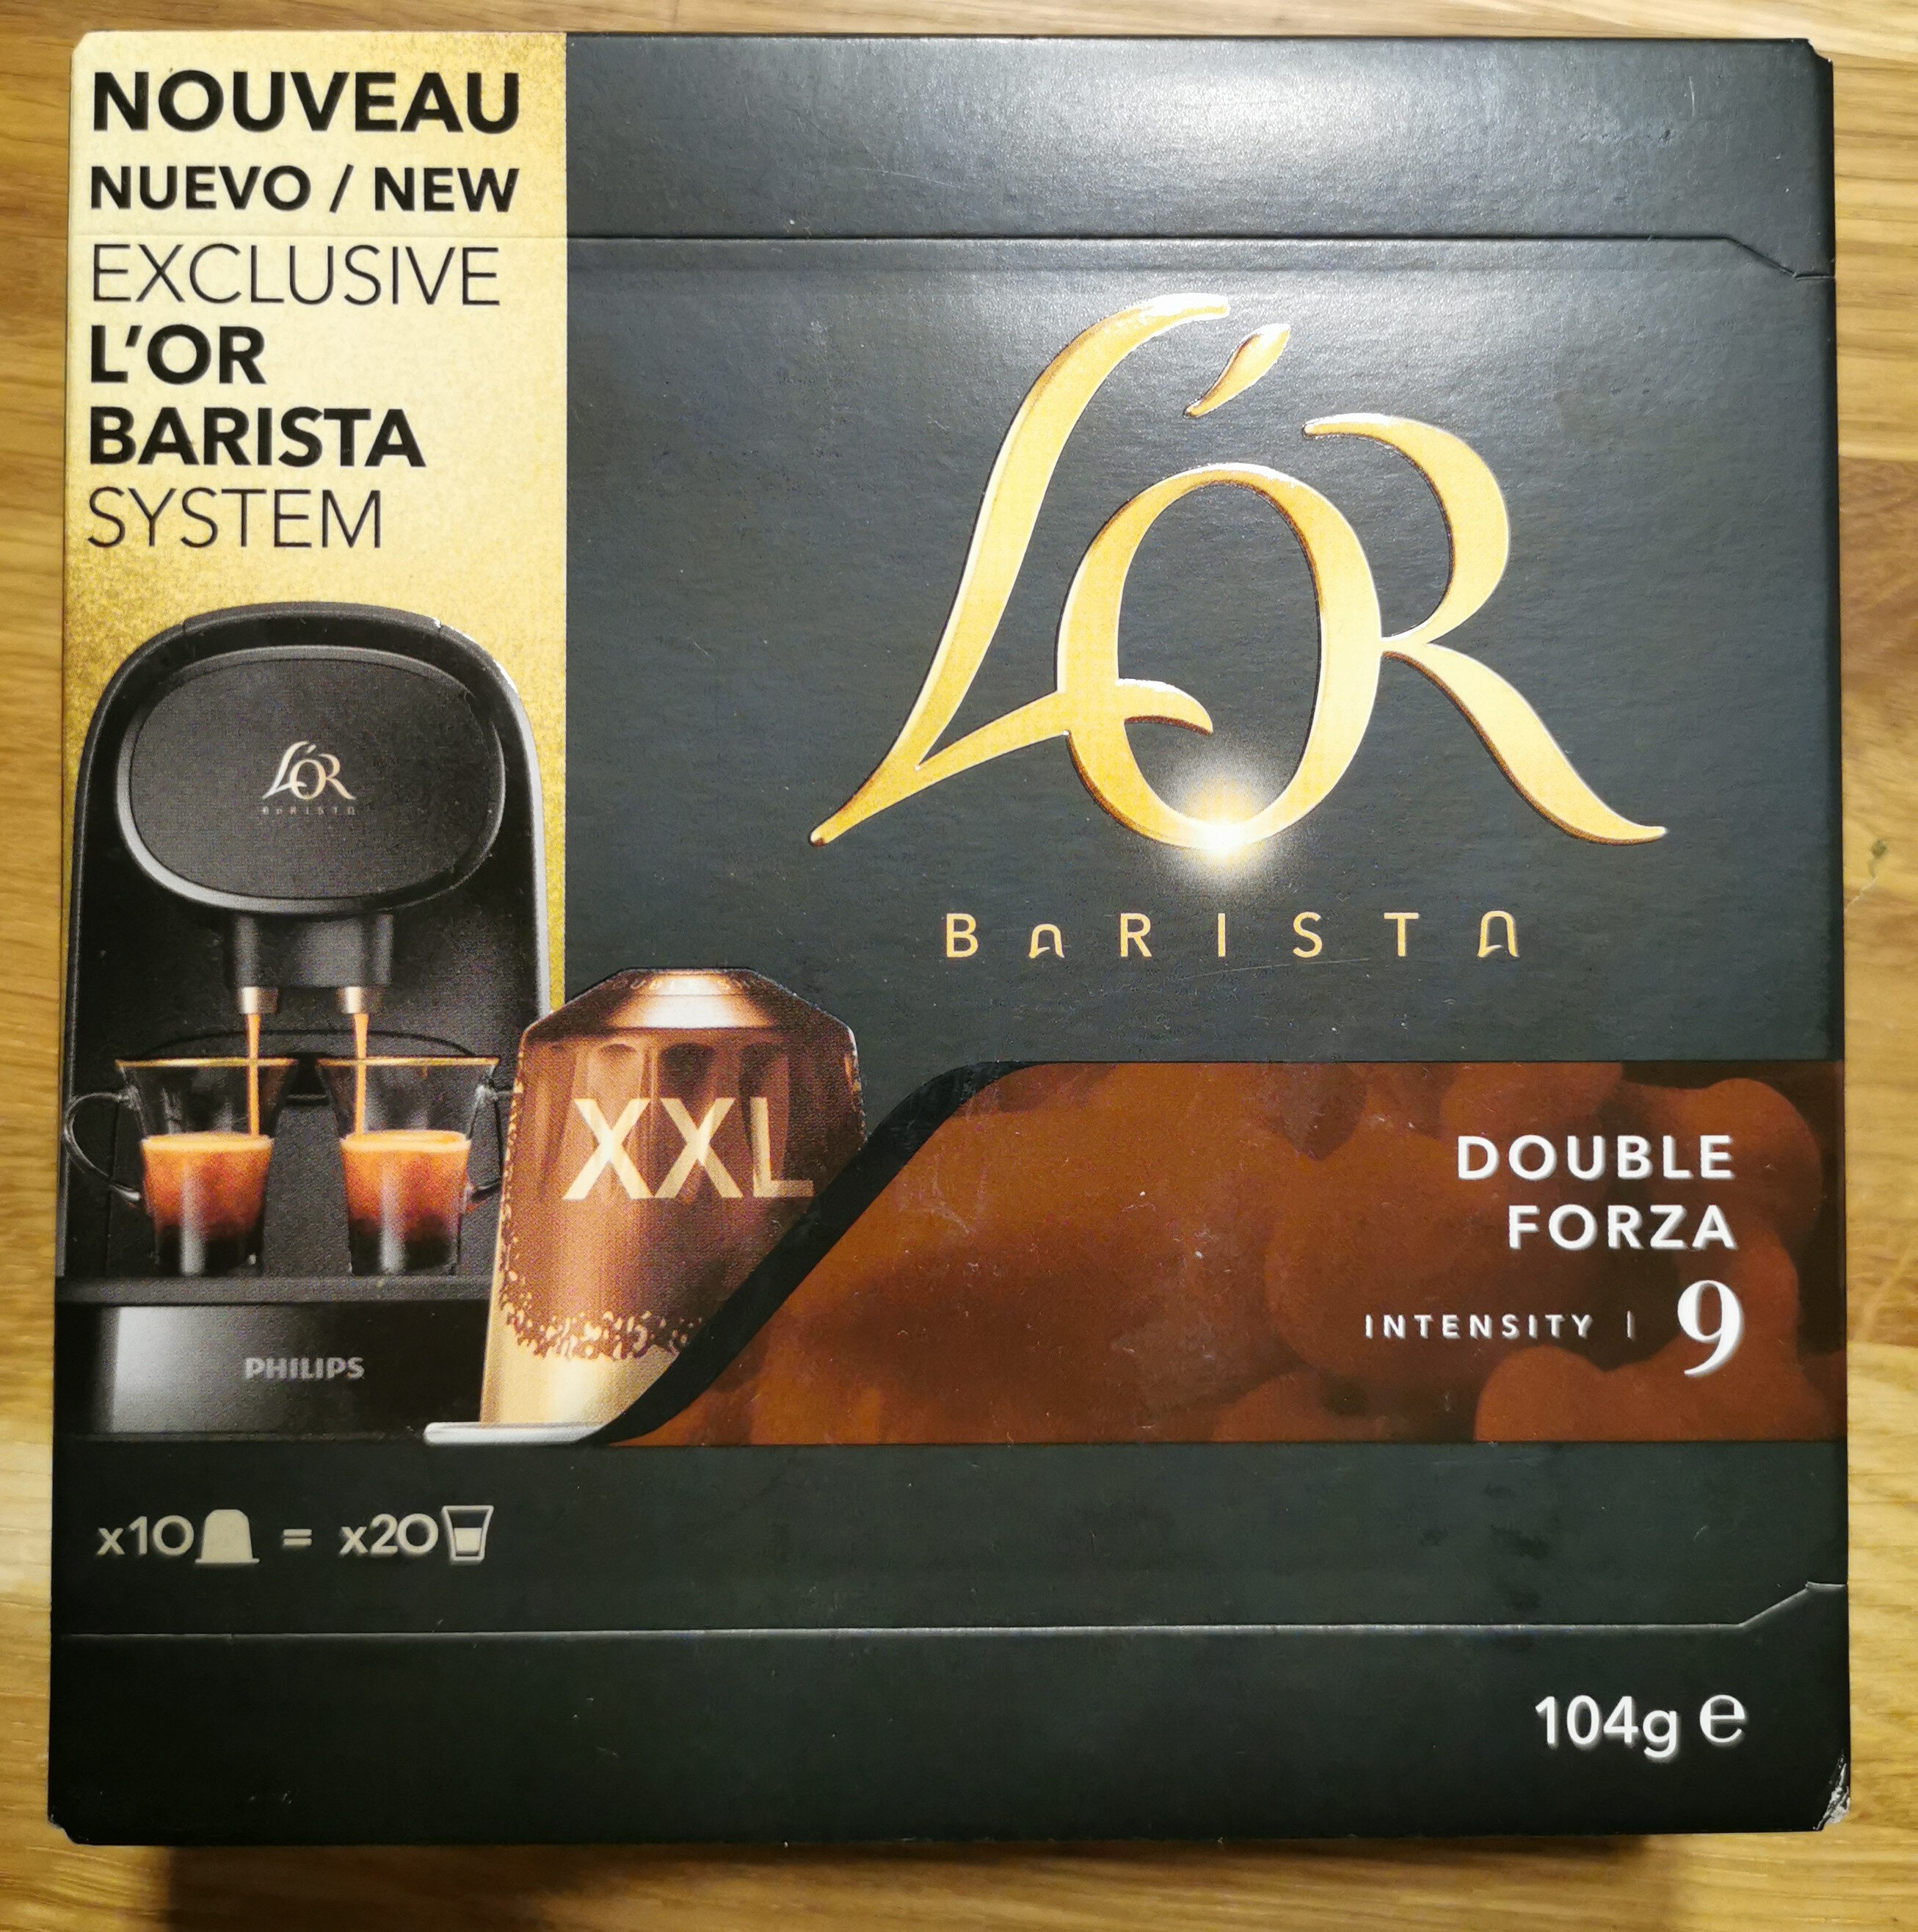 L'or Barista Double Forza Intensity 9 - Produkt